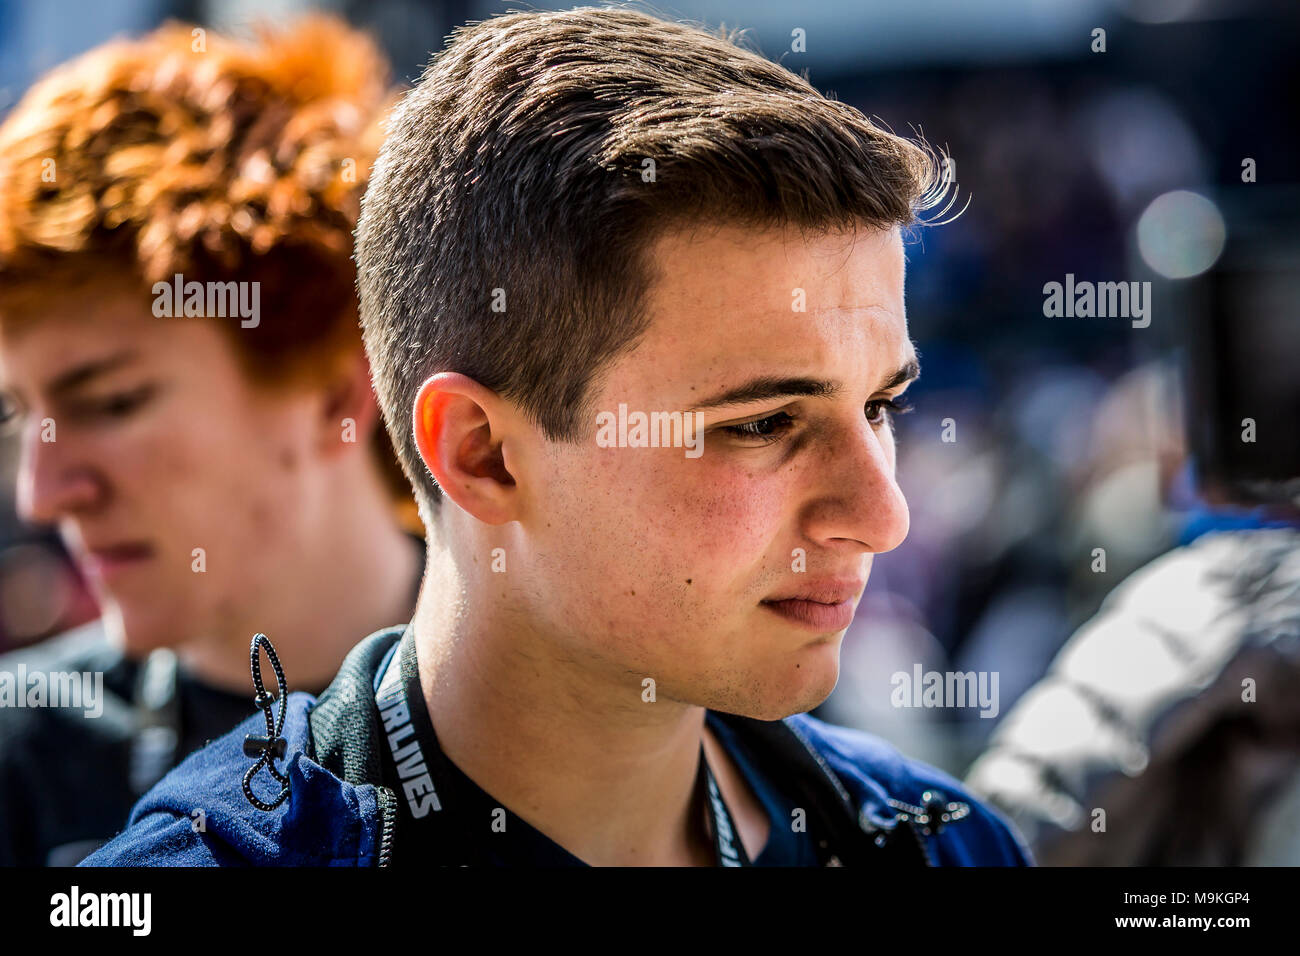 Washington Dc, United States. 24th Mar, 2018. Cameron Kasky: 'To the leaders, cynics, and skeptics who told to sit down and stay silent -- wait your turn. Welcome to the Revolution.' Credit: Michael Nigro/Pacific Press/Alamy Live News Stock Photo